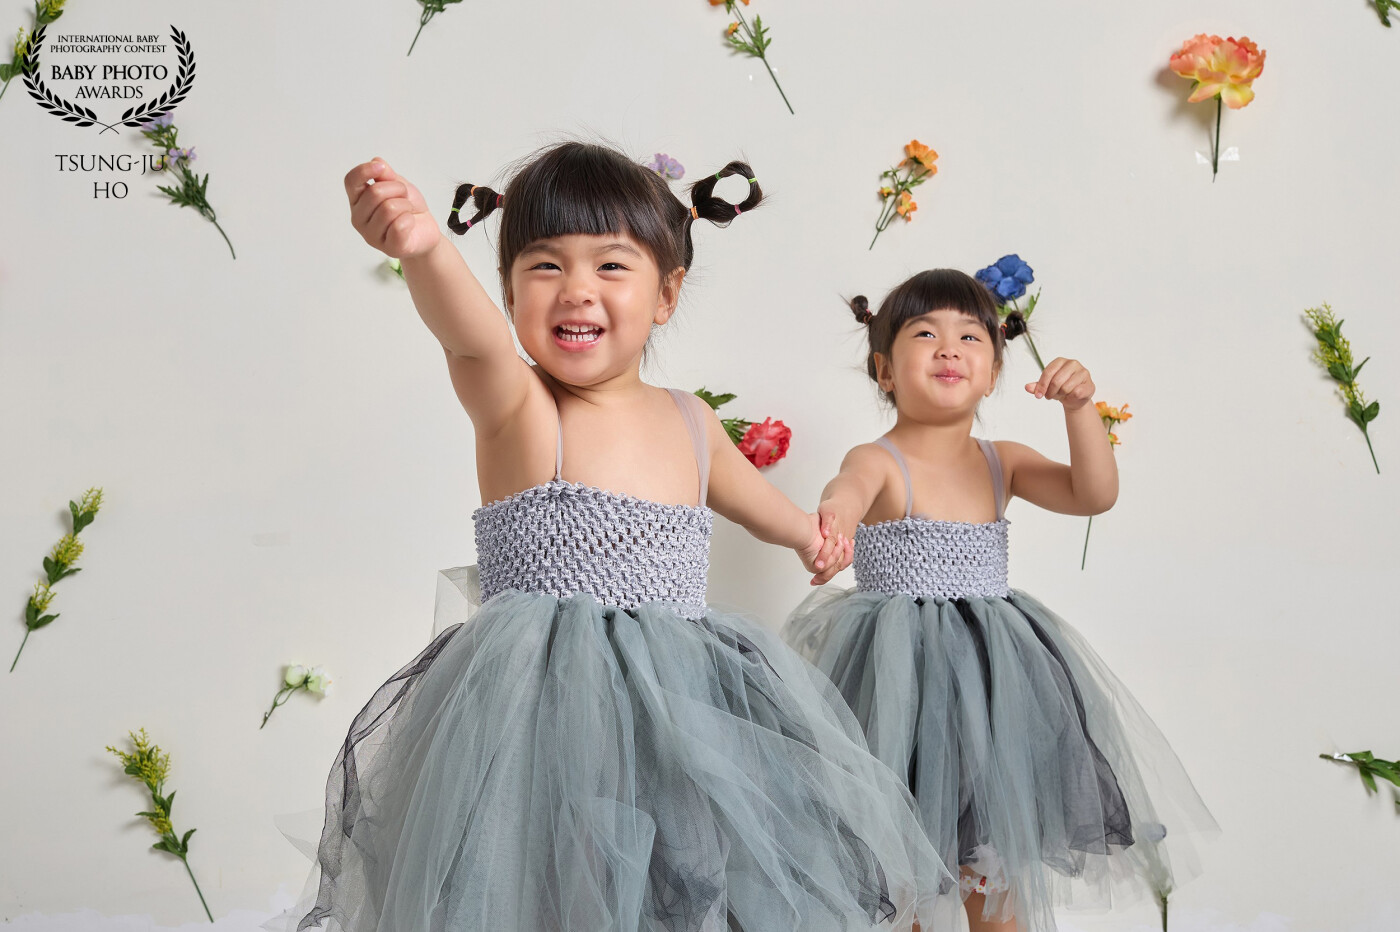 Even through the screen, one can feel the joy of this pair of twins, their innocence so natural and pure. The radiance of childhood emanates from their faces, and in this moment, it's as if an infinite number of fresh flowers are blooming simultaneously – utterly enchanting!